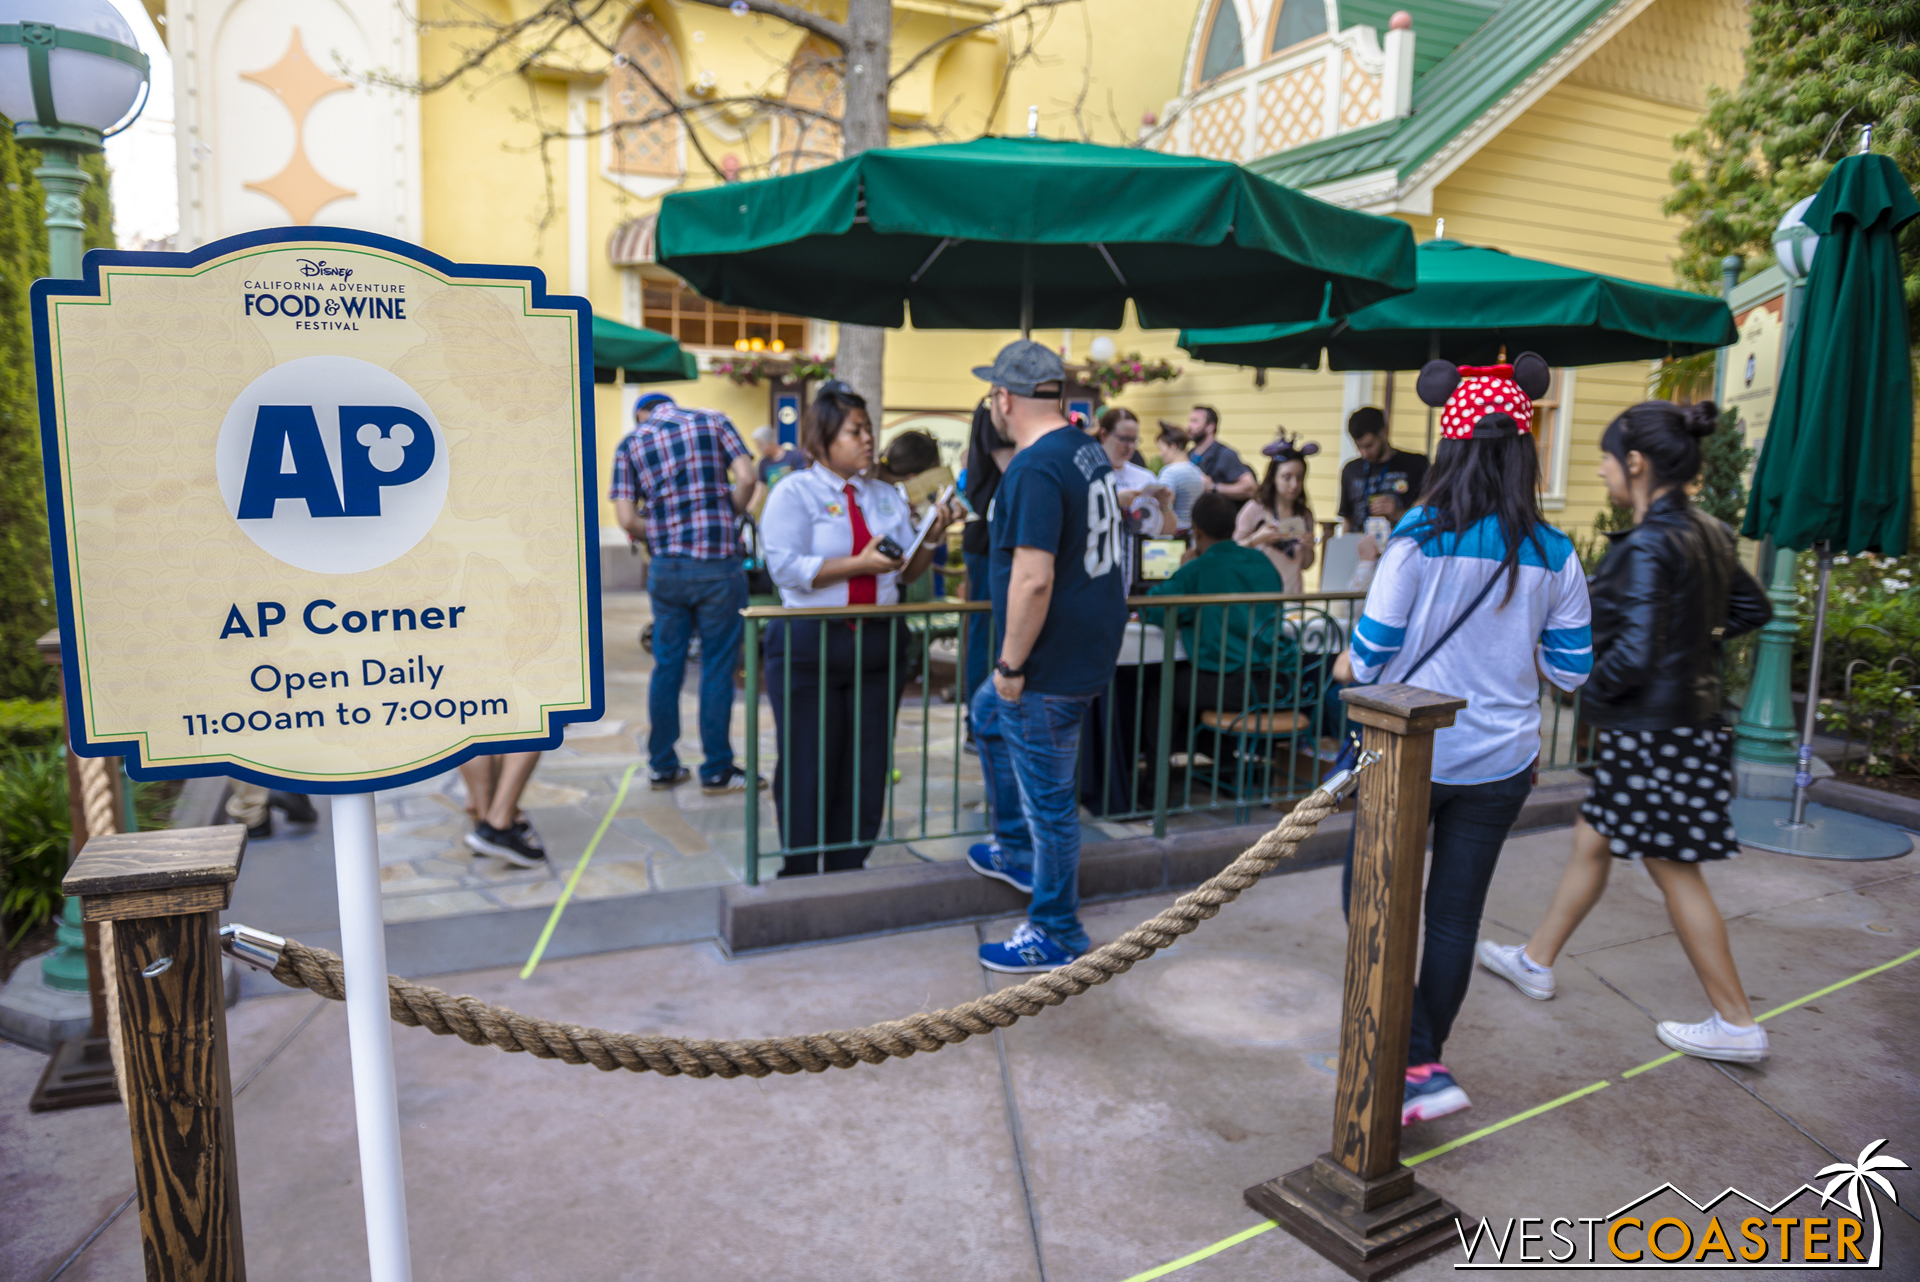  Over in Paradise Pier, beside the Garden Grill, an AP Corner has been set up for Annual Passholders to collect their button, which will be different each week, and get a photo op. 